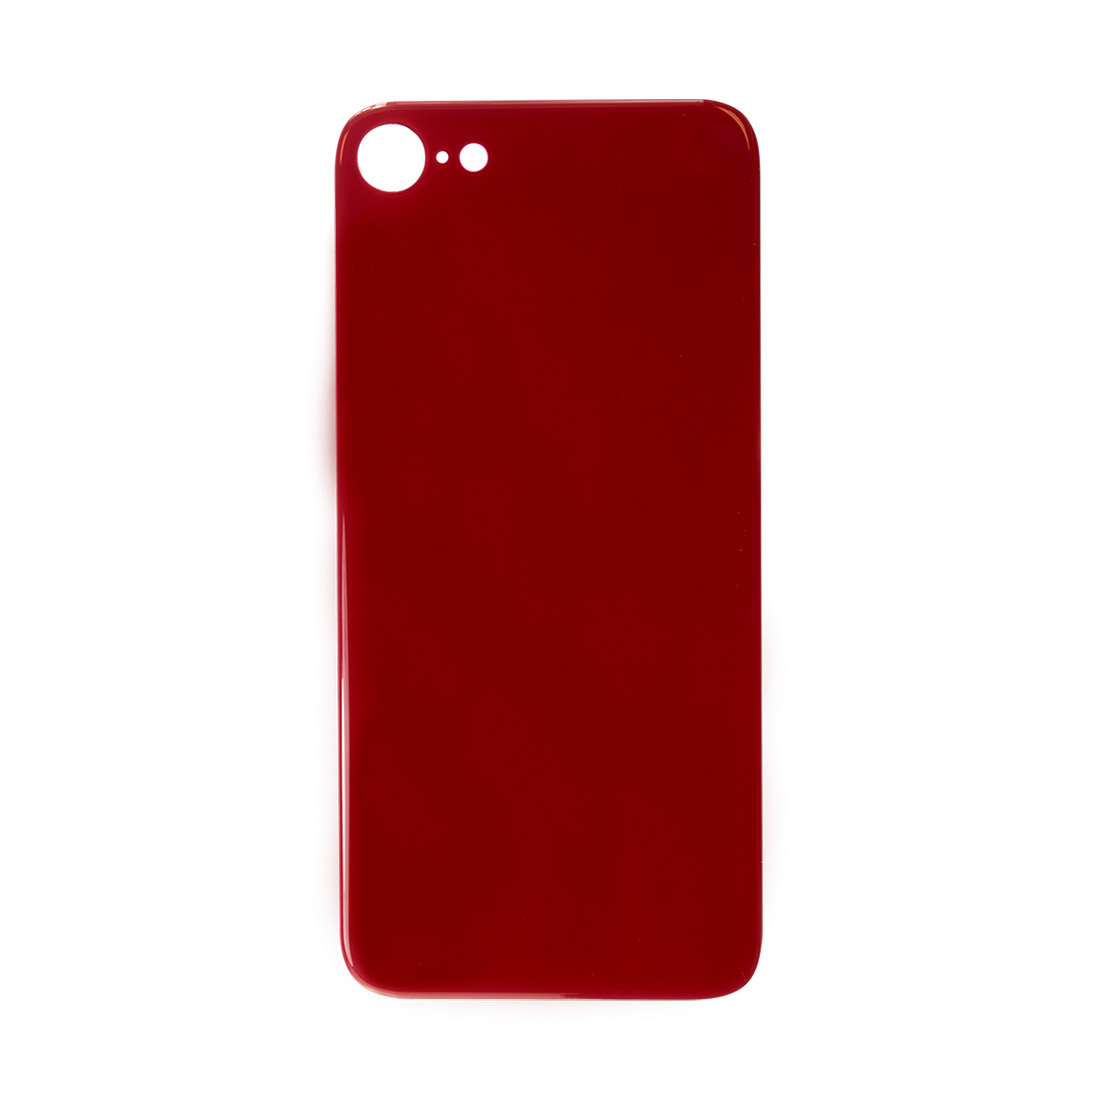 iPhone 8 Back Cover - Red (Large Camera Hole) - MK Mobile